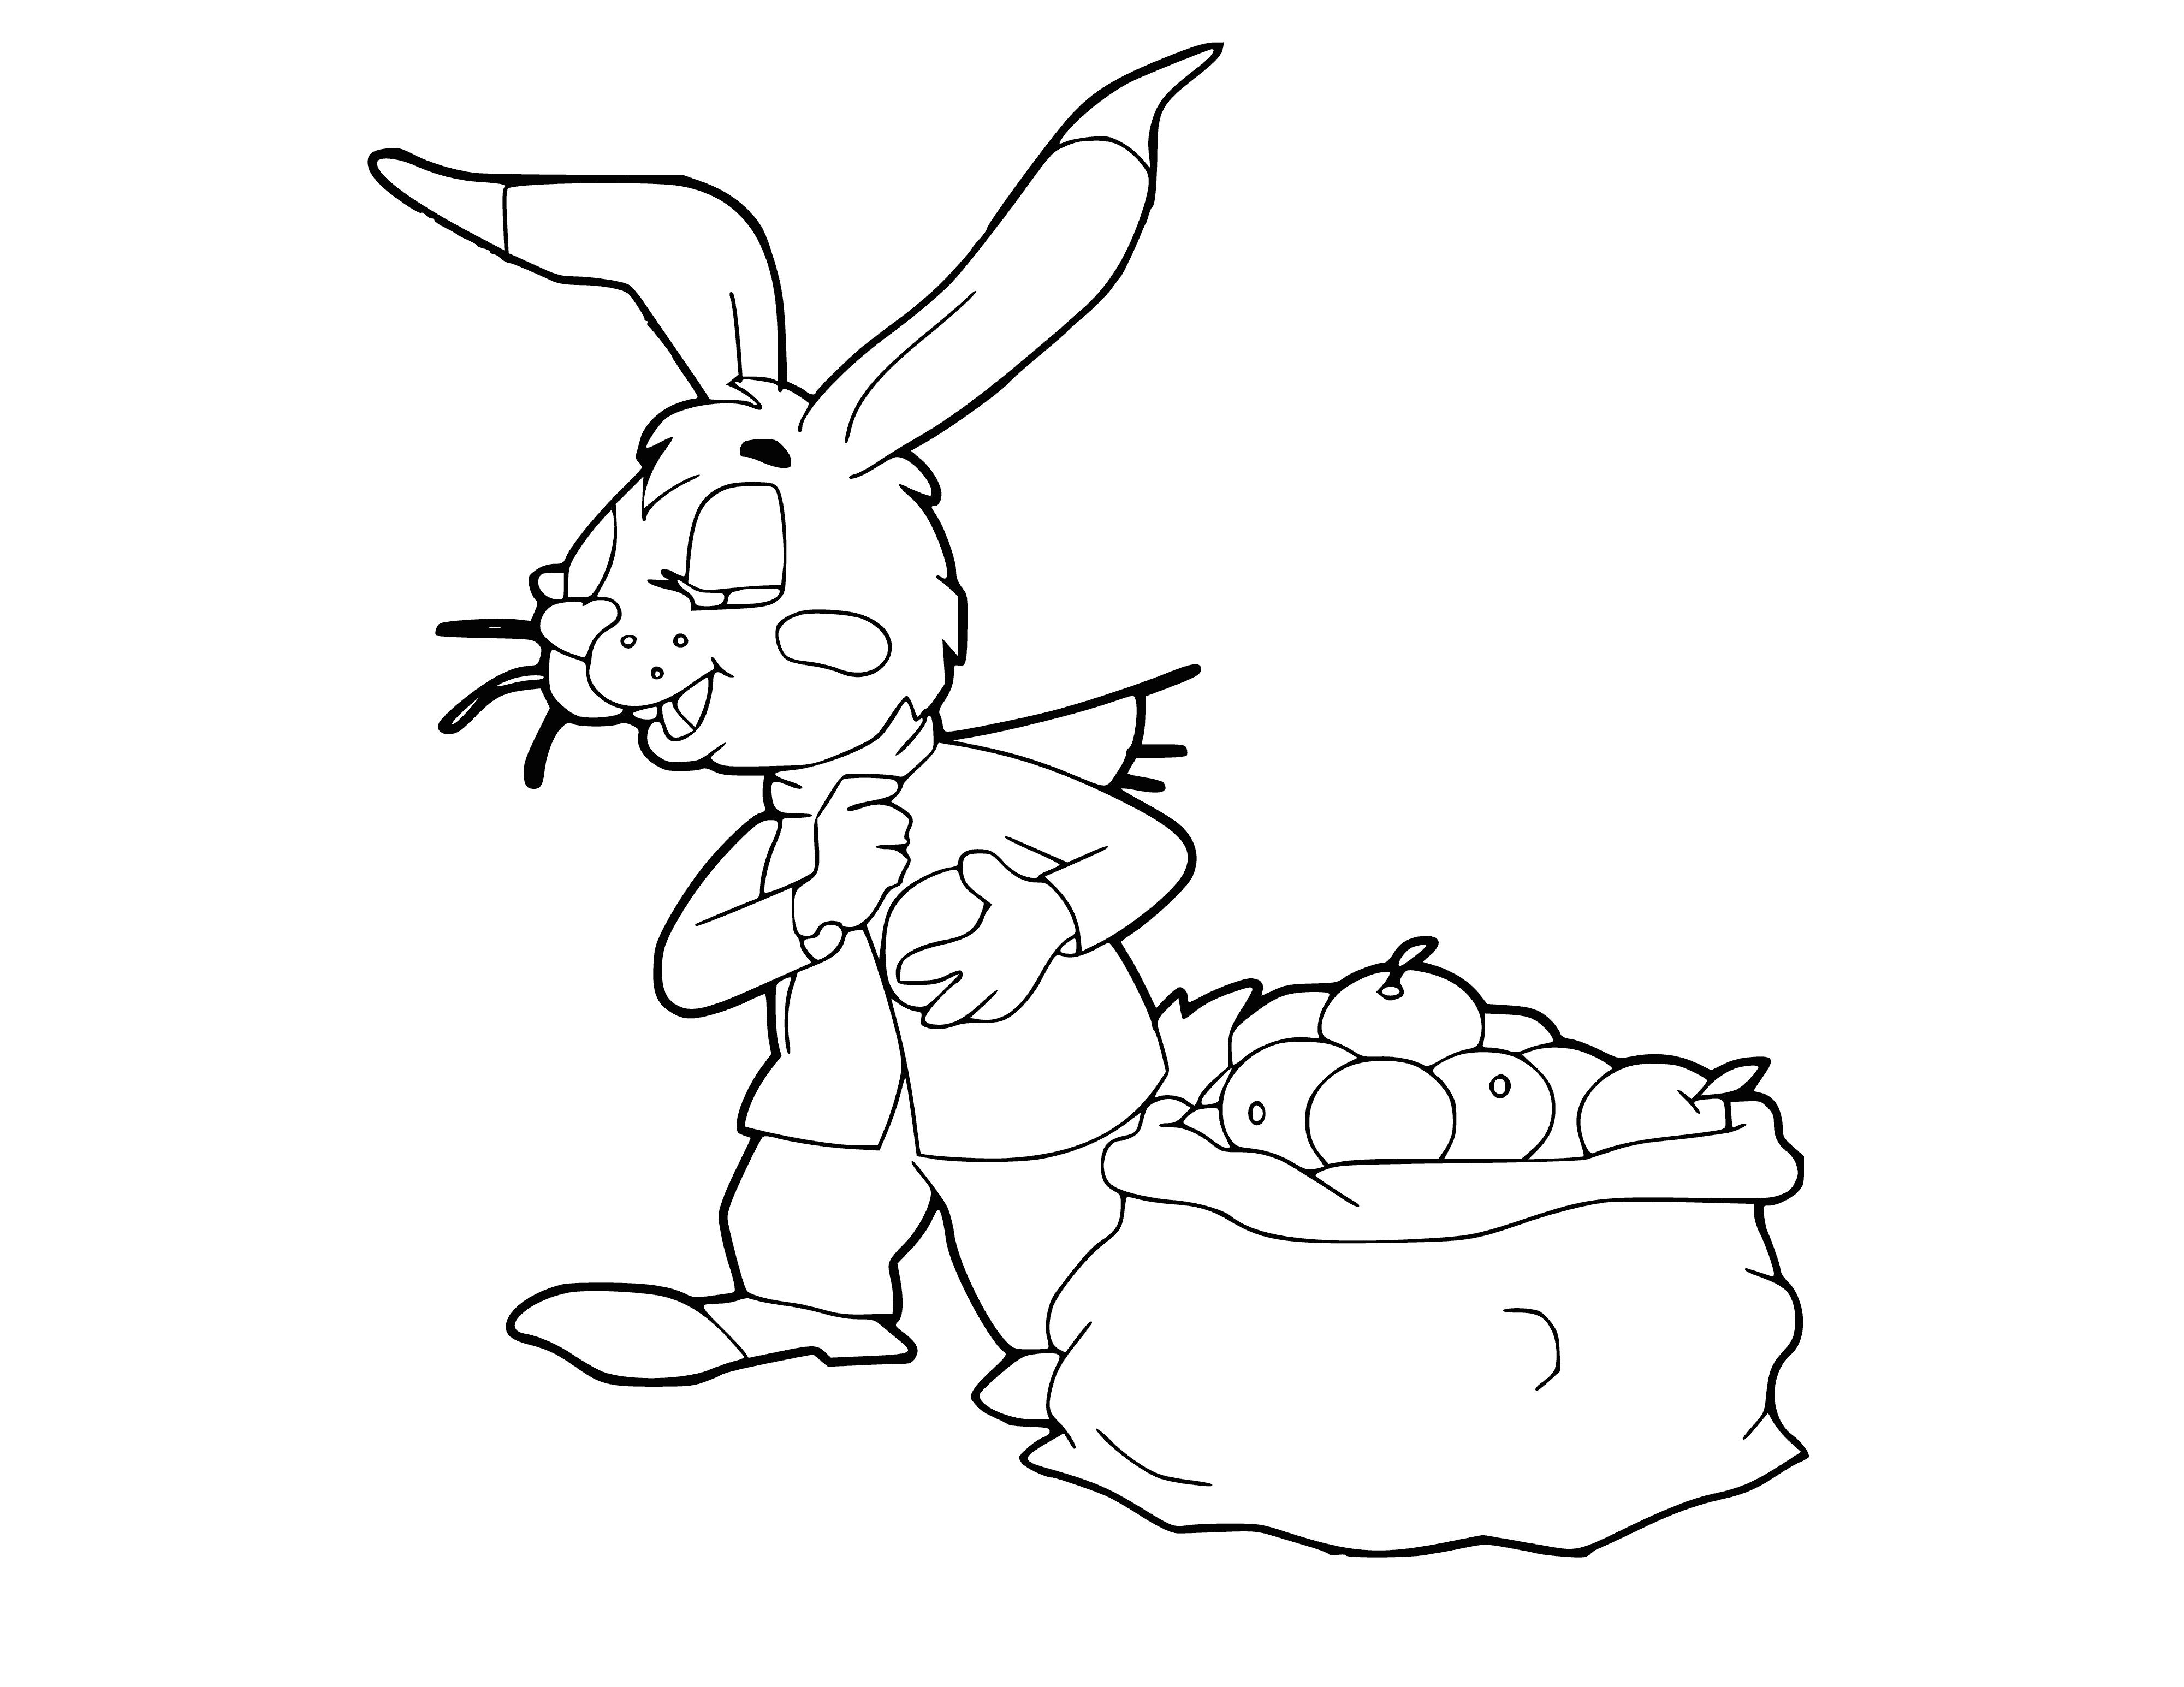 coloring page: Hare picking up a sack of apples, with red and green apples. Happiness abounds! #coloringpage #apples